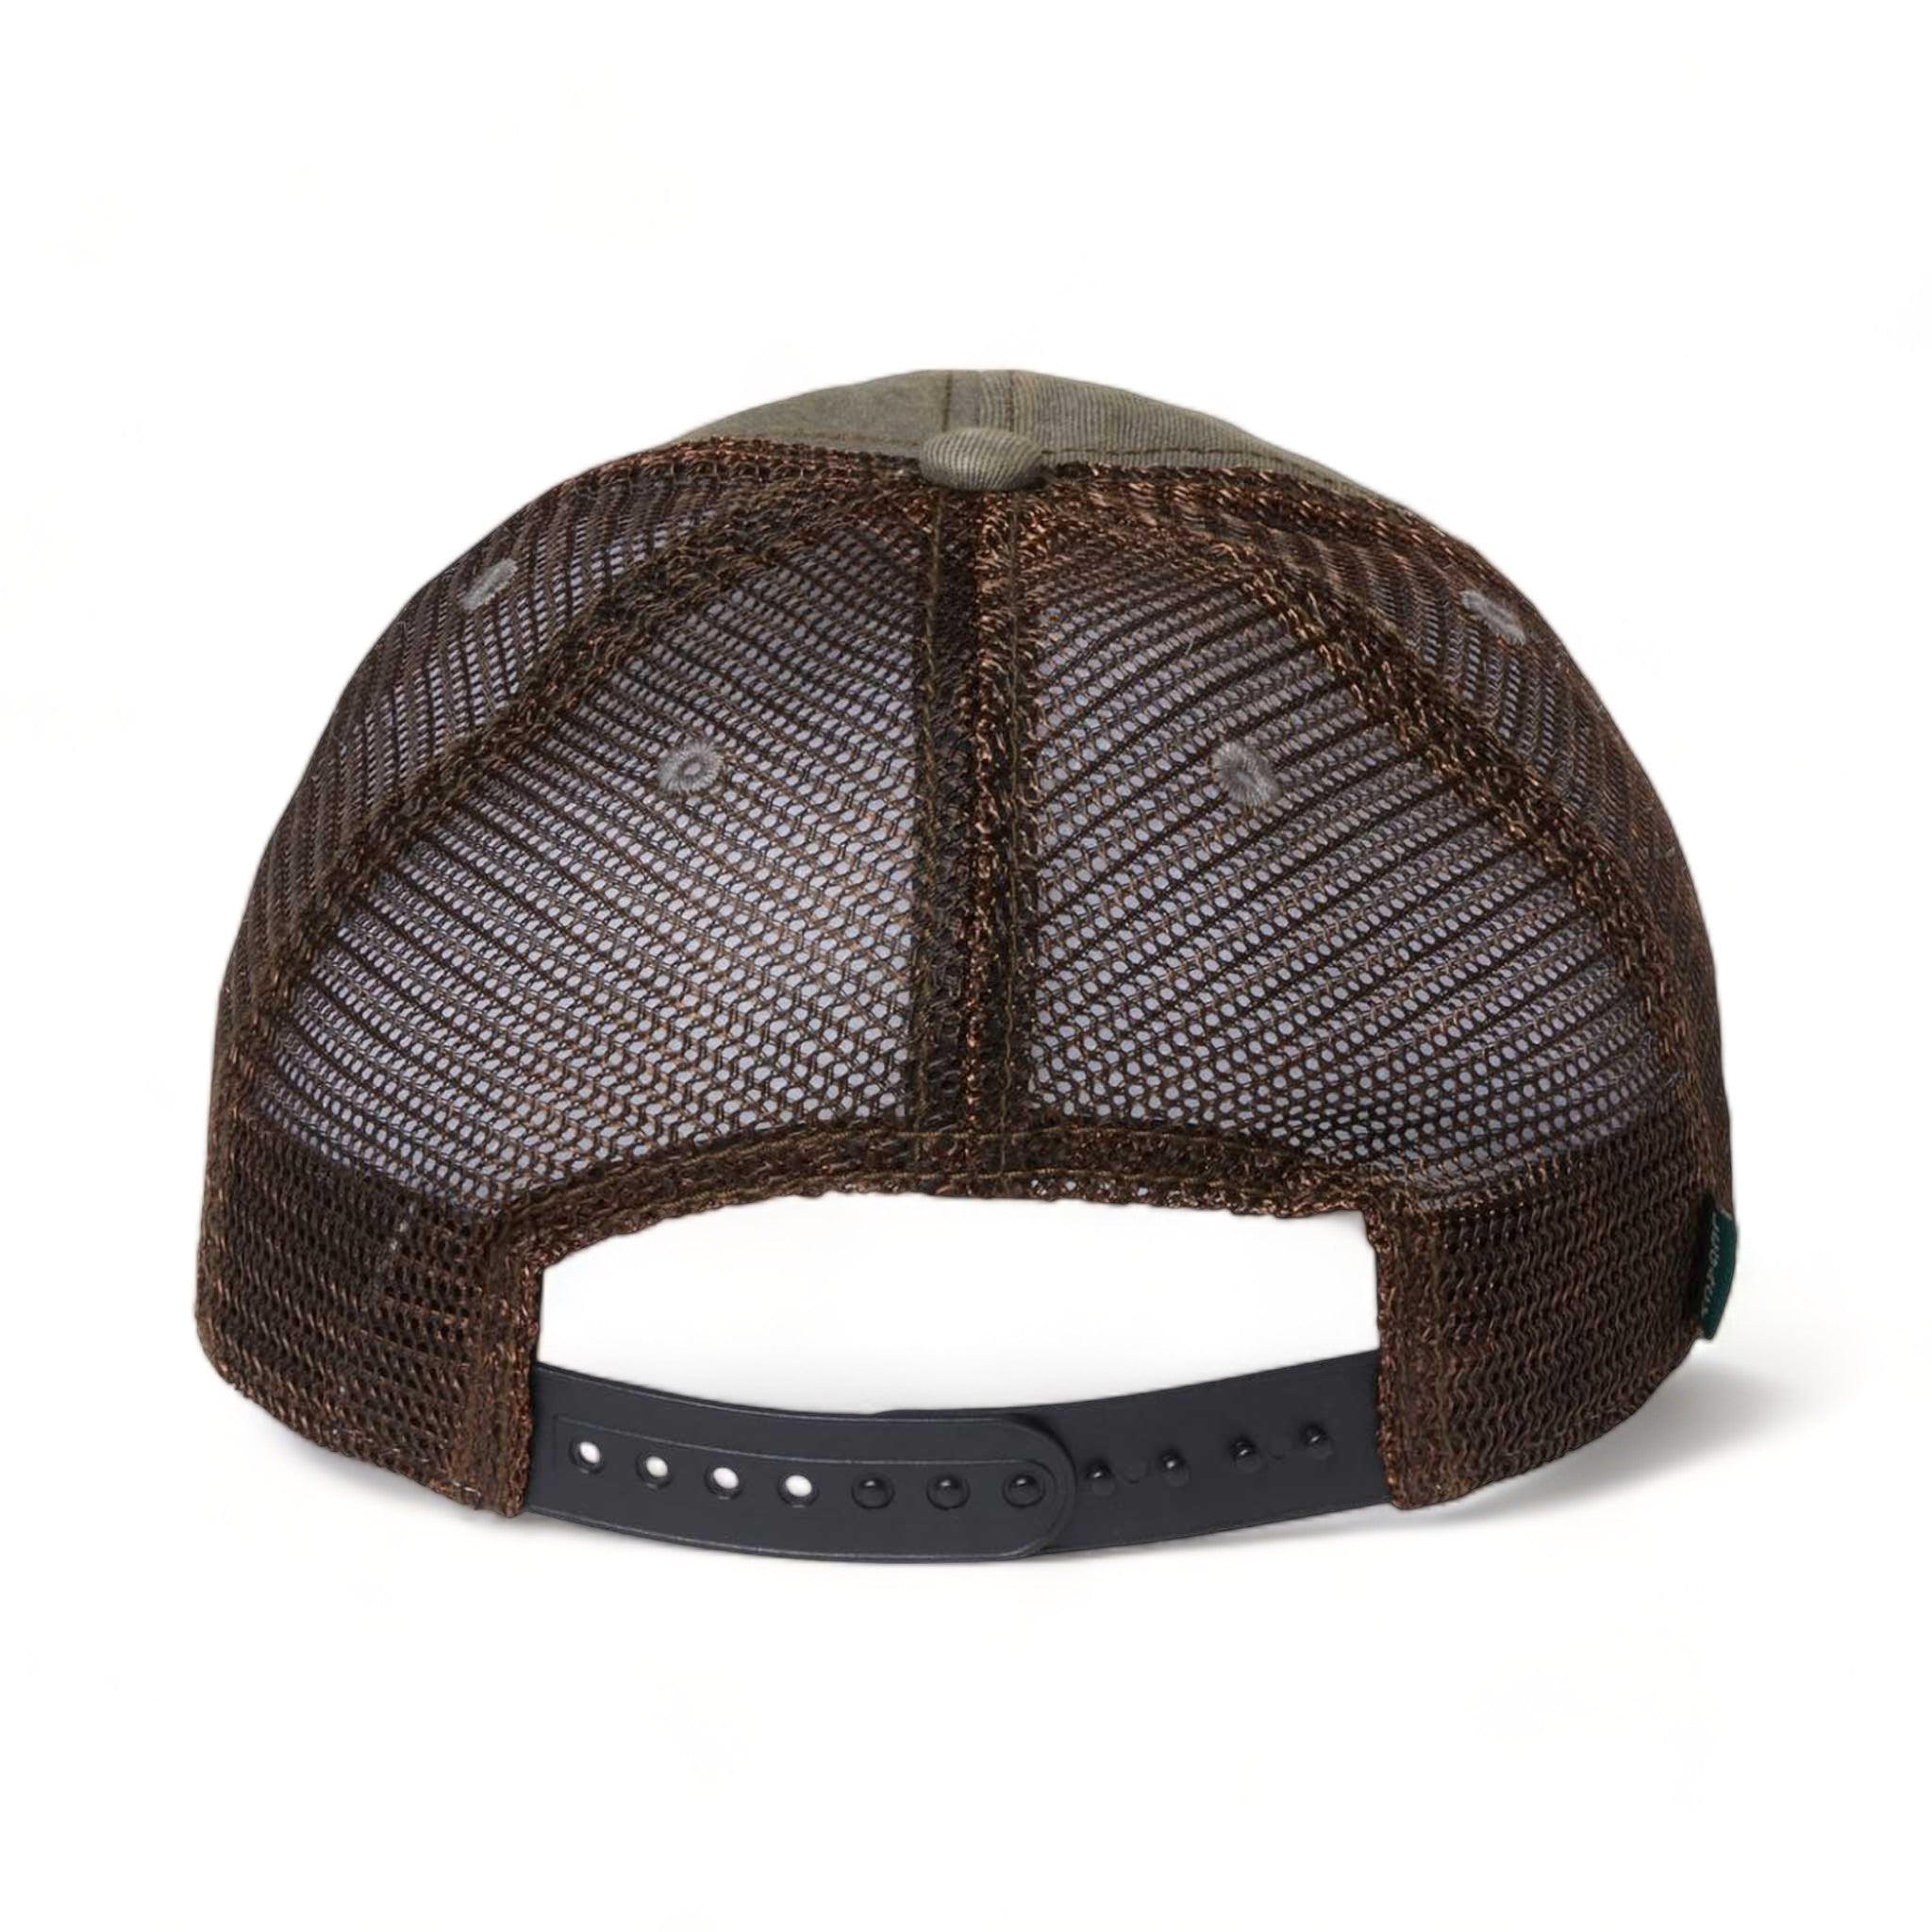 Back view of LEGACY OFA custom hat in grey and brown